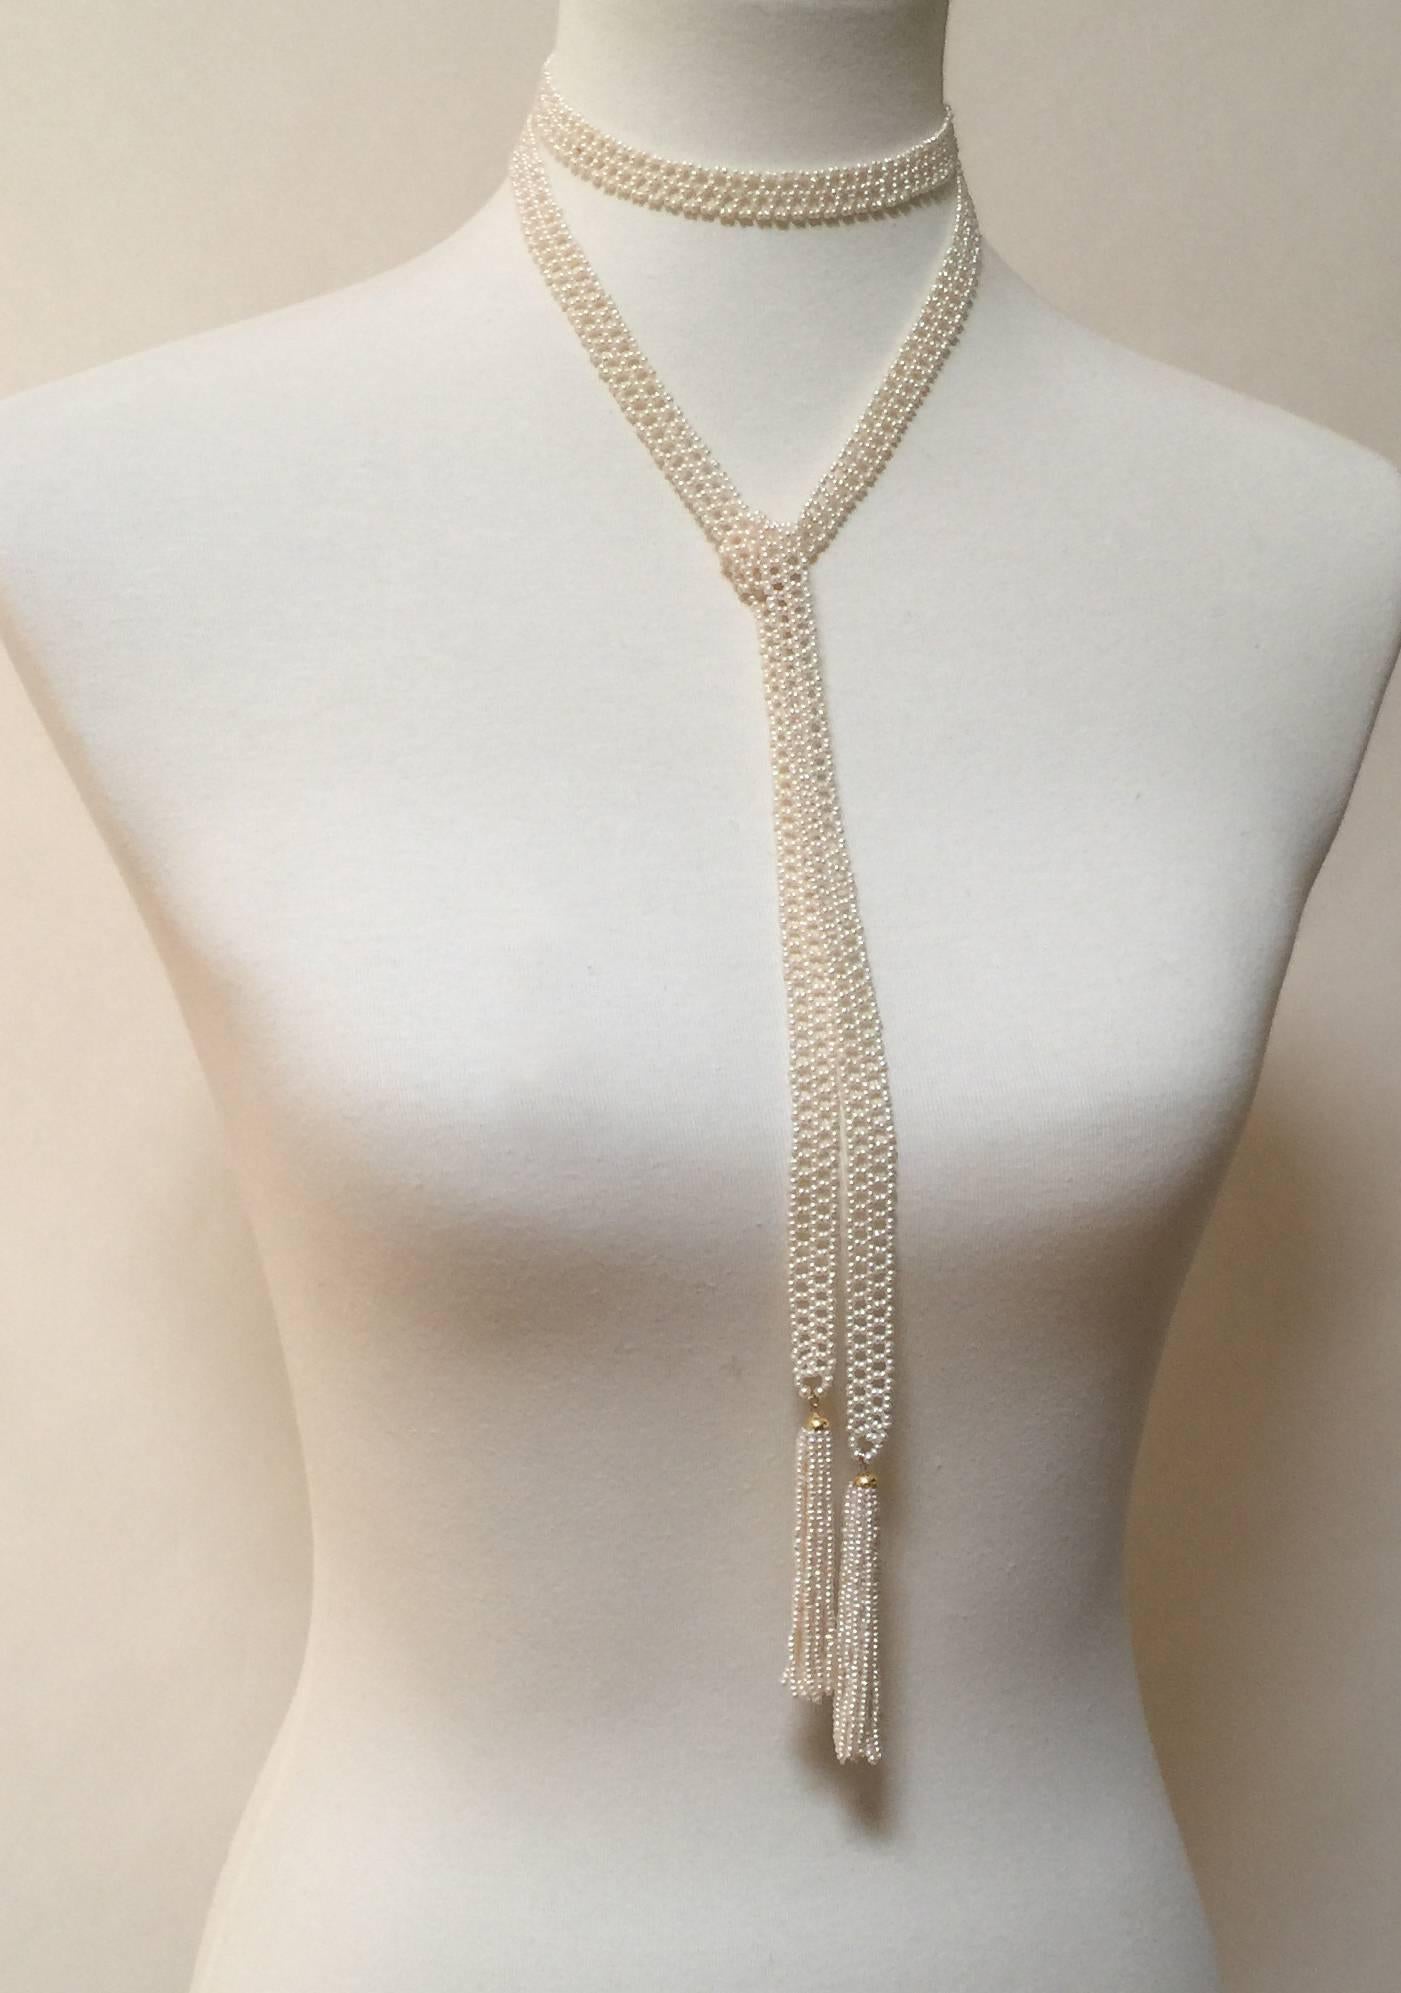 This woven seed pearl sautoir has a vintage and elegant look with creamy glow of the pearls and delicate ribbon like weave of the sautoir. At 54 inches long the sautoir can be easily styled however you want. Brooches or heirlooms can be added